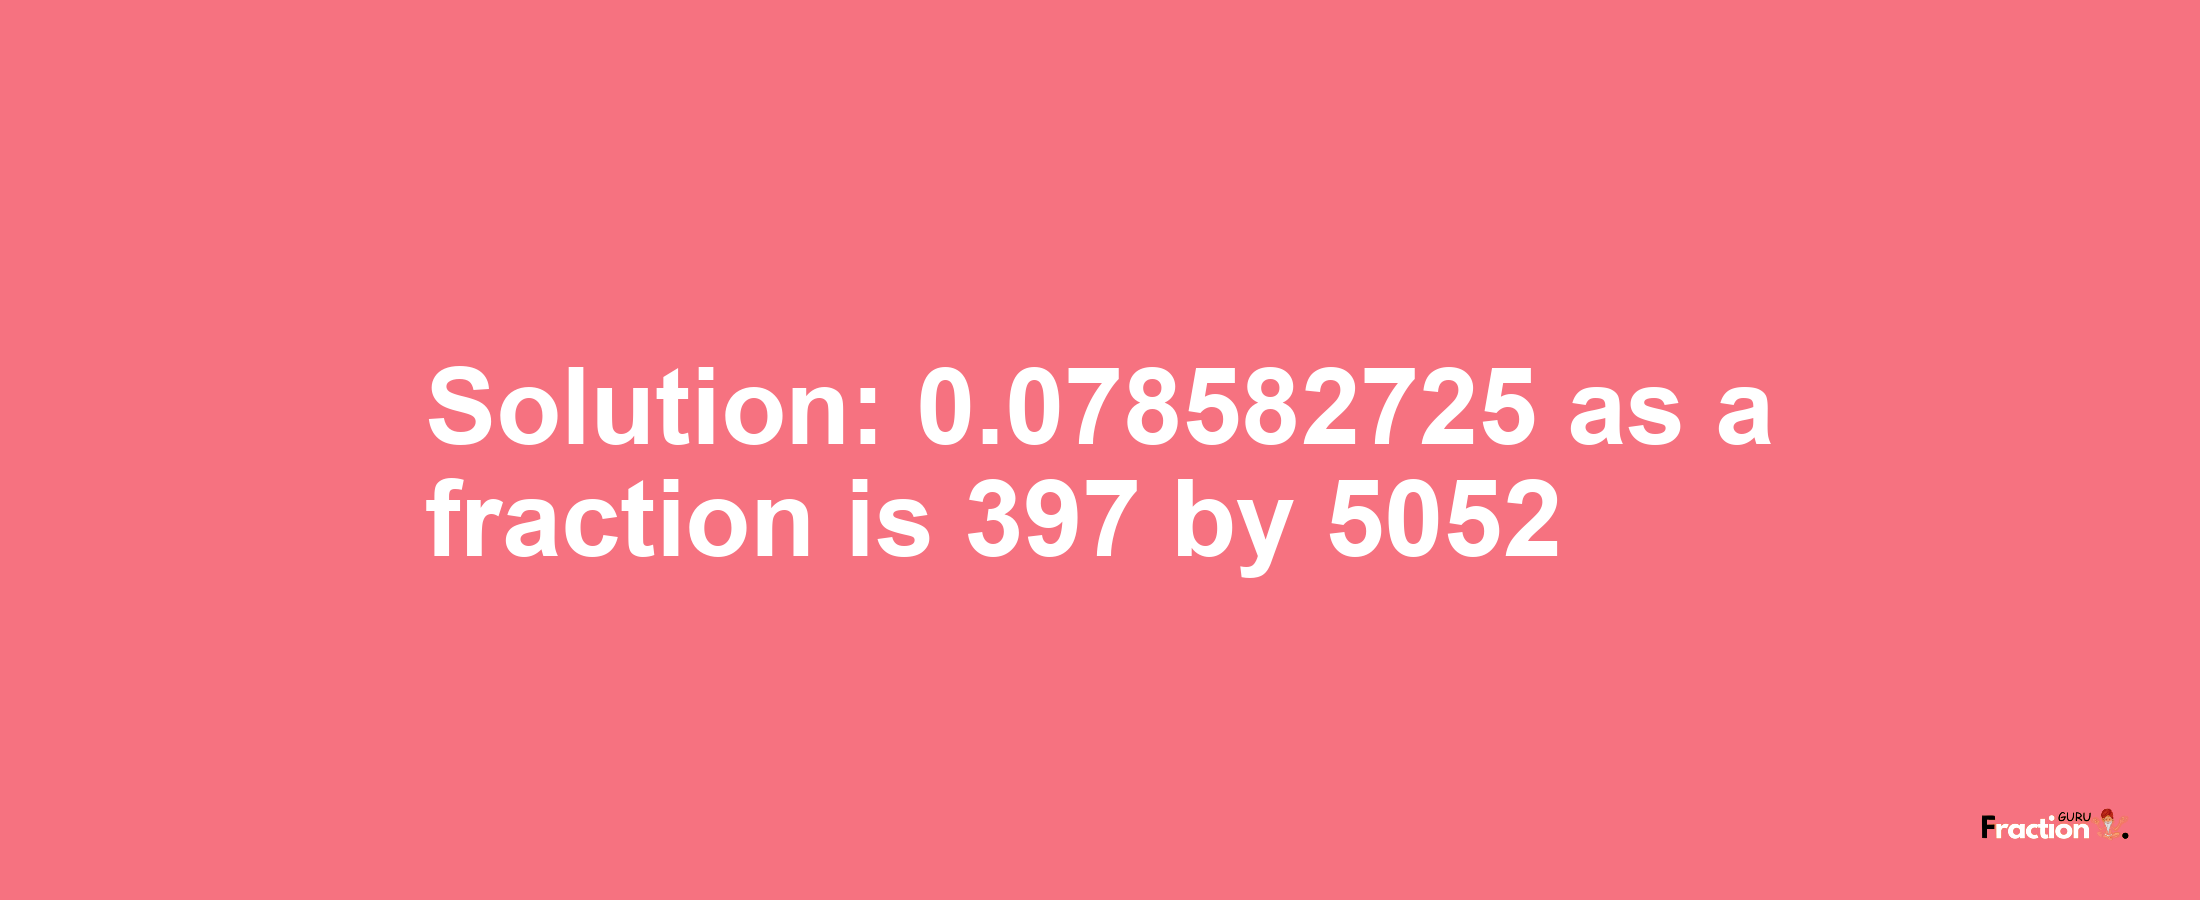 Solution:0.078582725 as a fraction is 397/5052